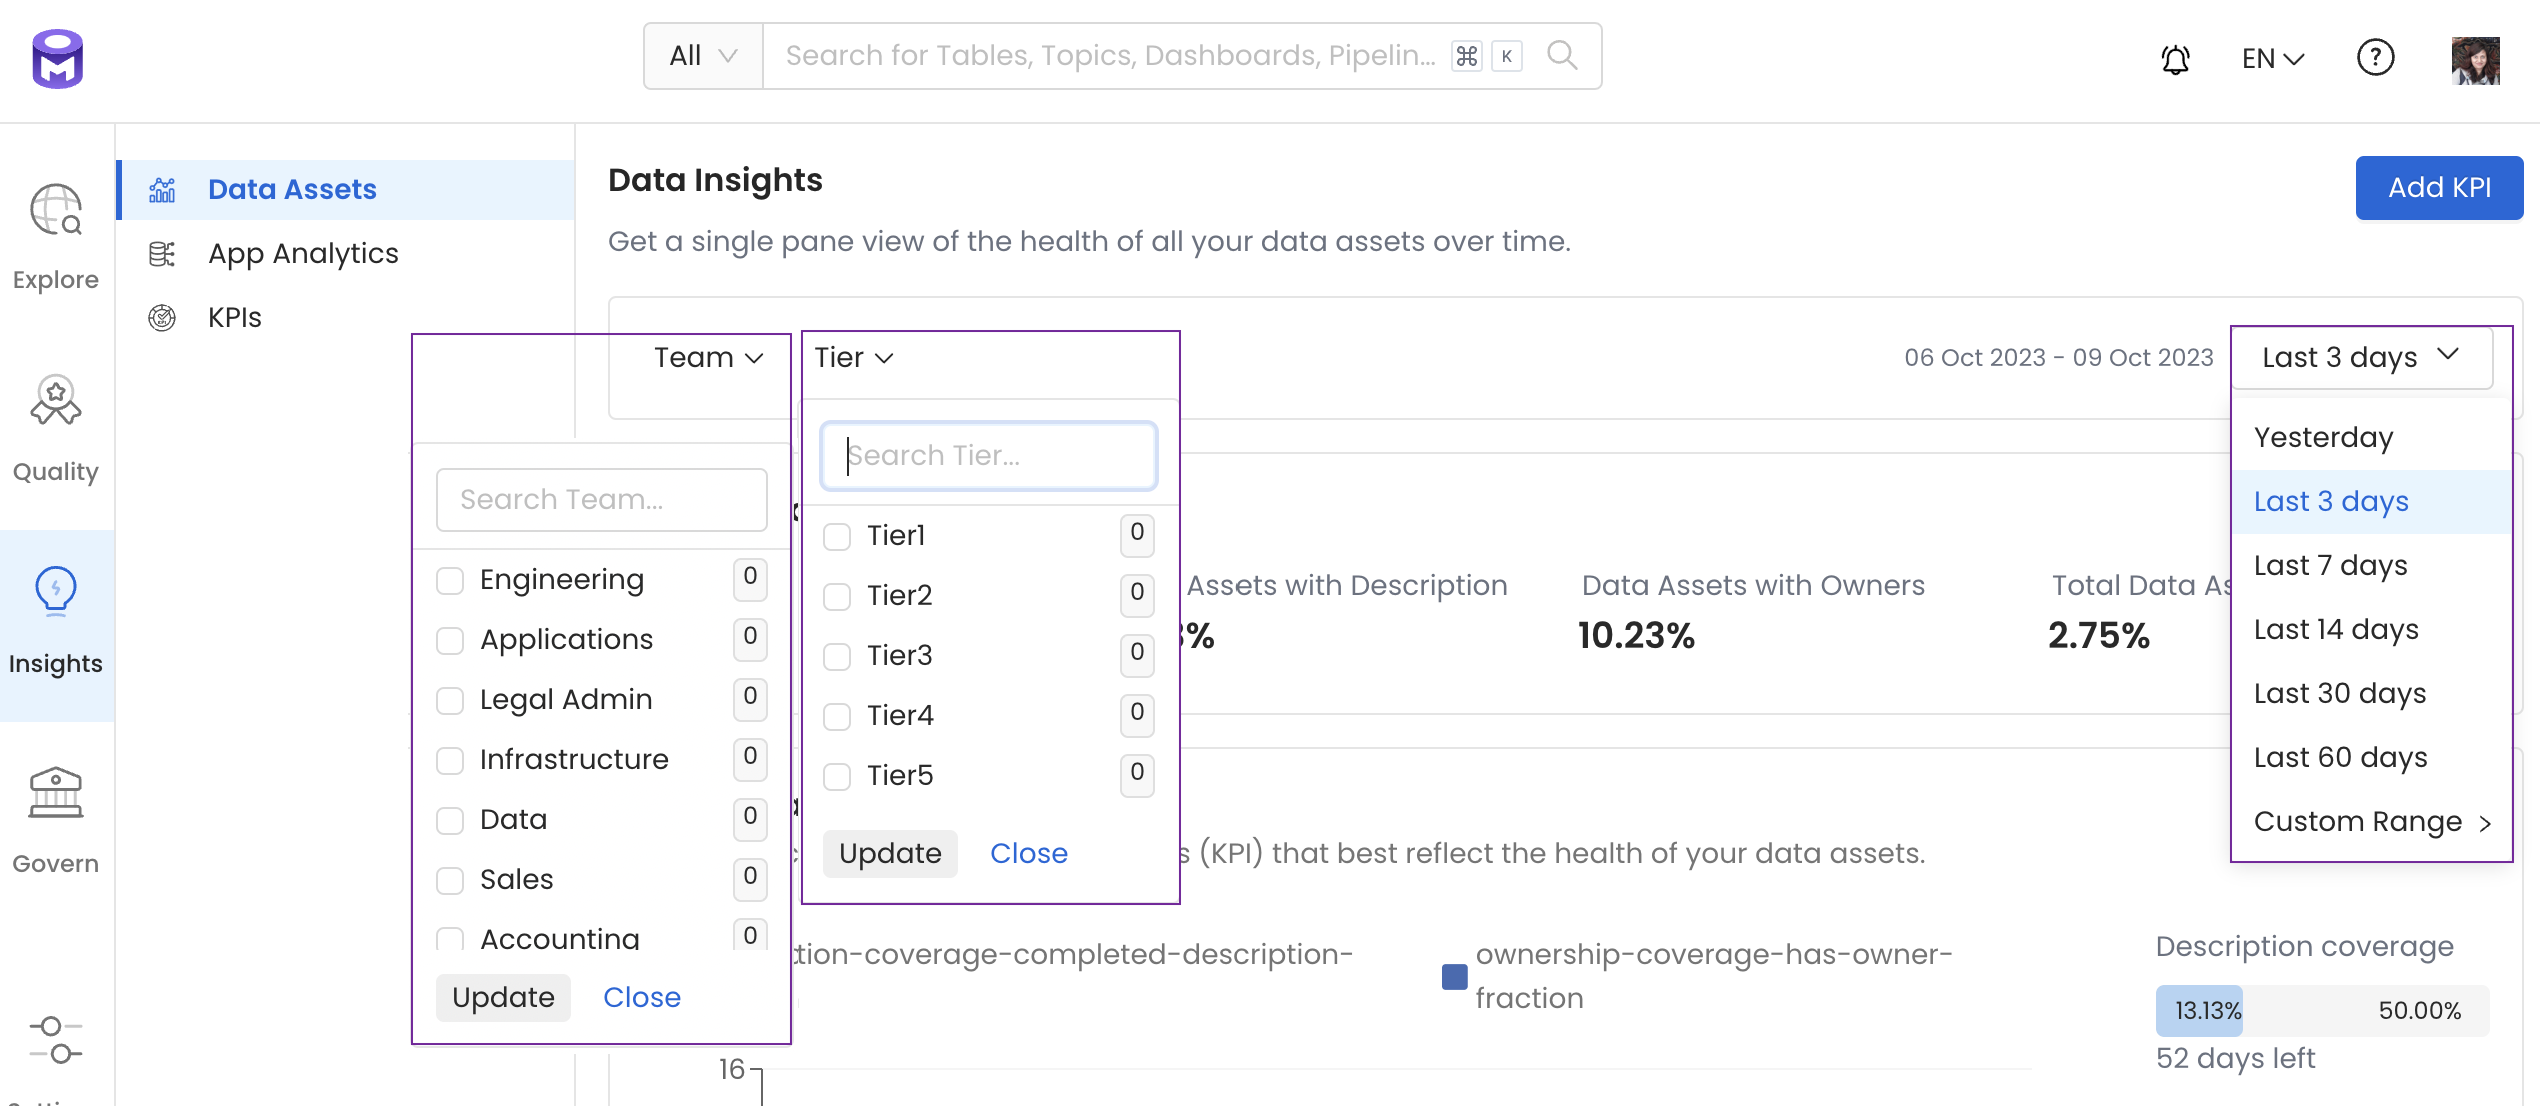 Data Insights Report Filters: Team, Tier, Time